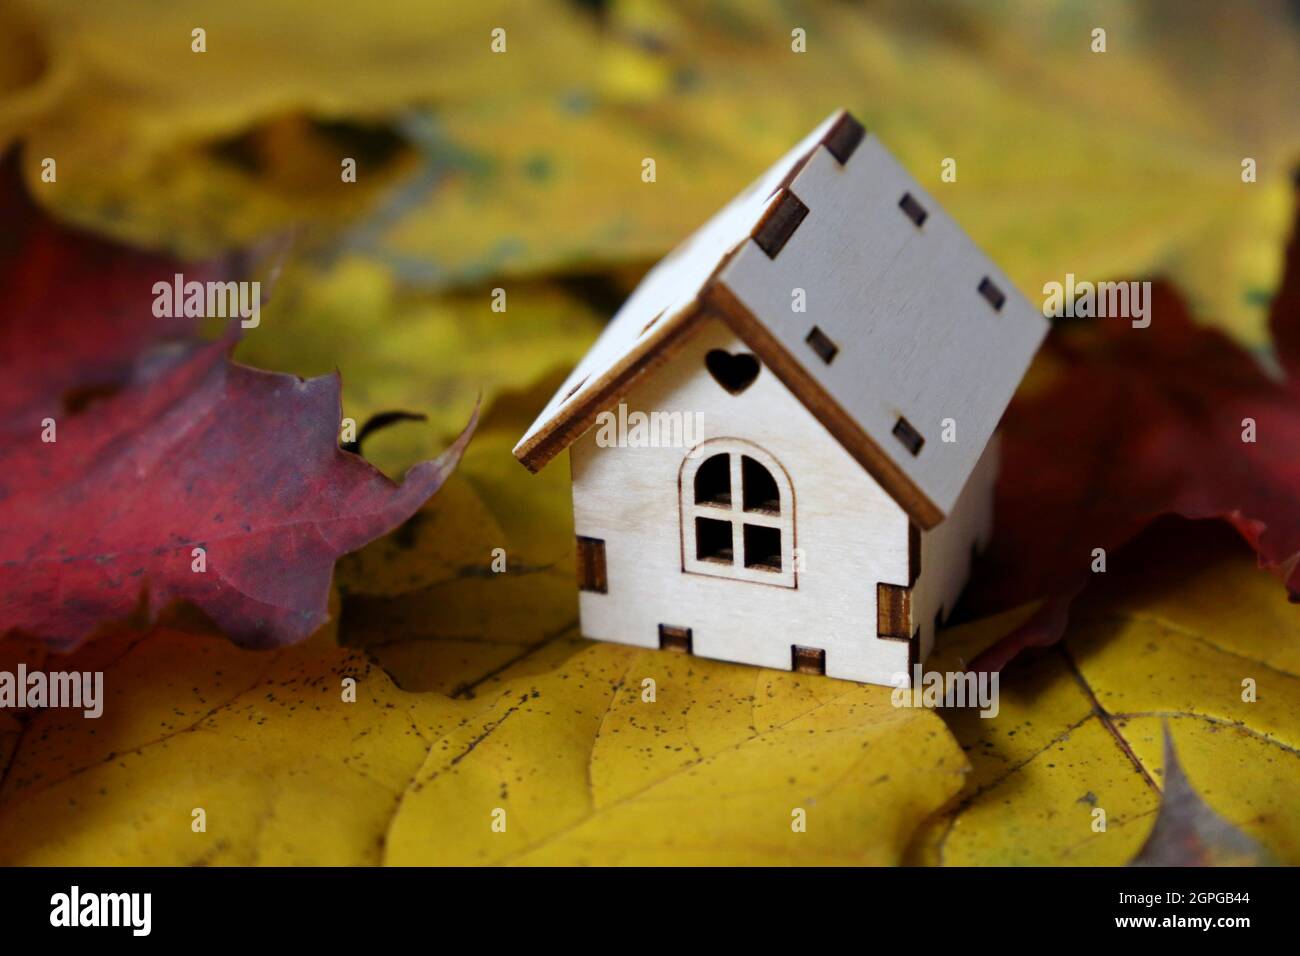 Wooden house model on maple leaves background. Concept of country cottage, housing search in autumn, real estate in ecologically clean area Stock Photo